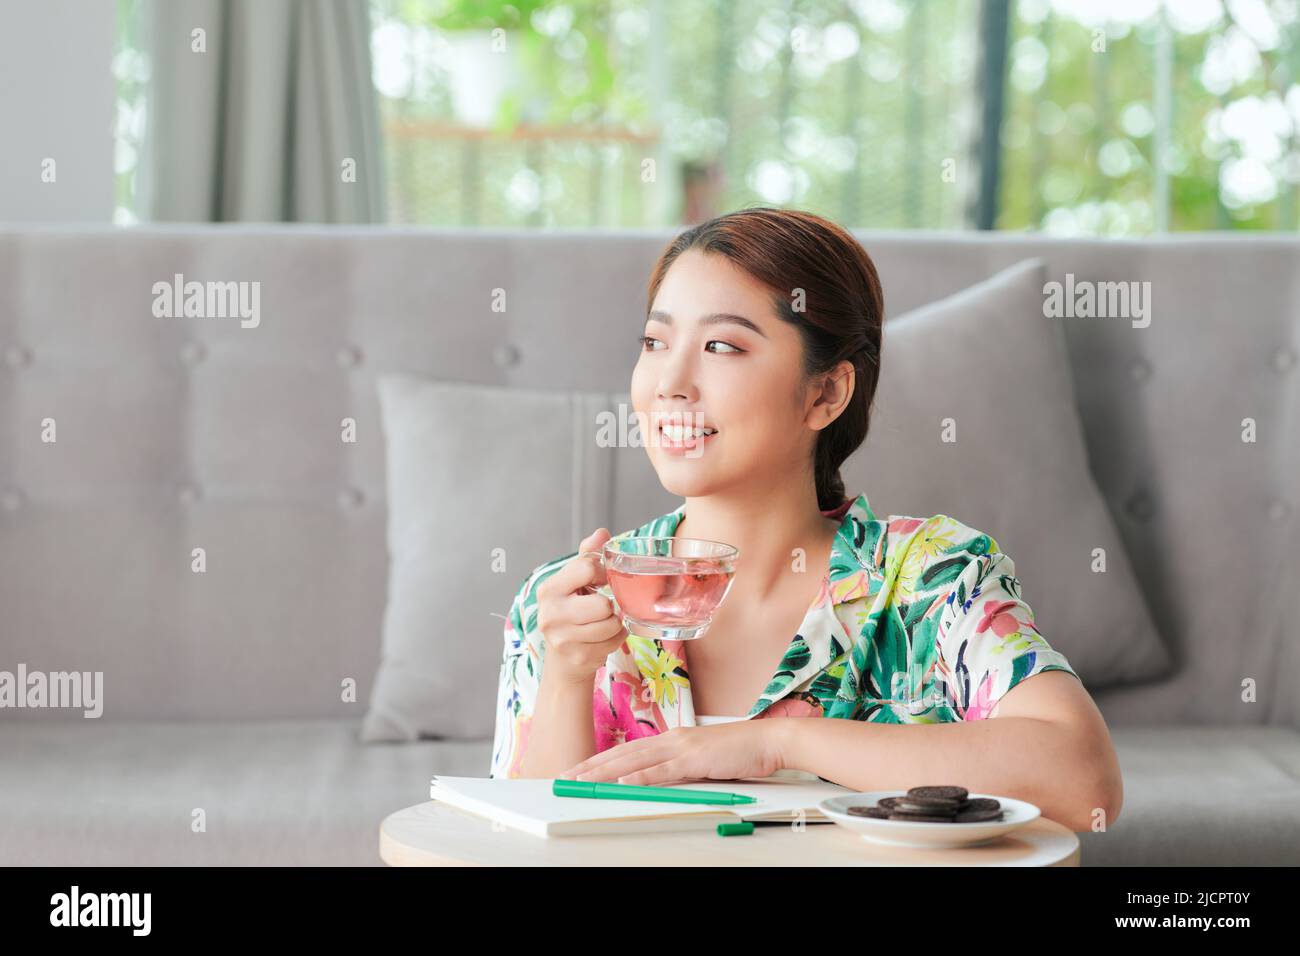 Smiling retired woman relaxing at home during quarantine Stock Photo